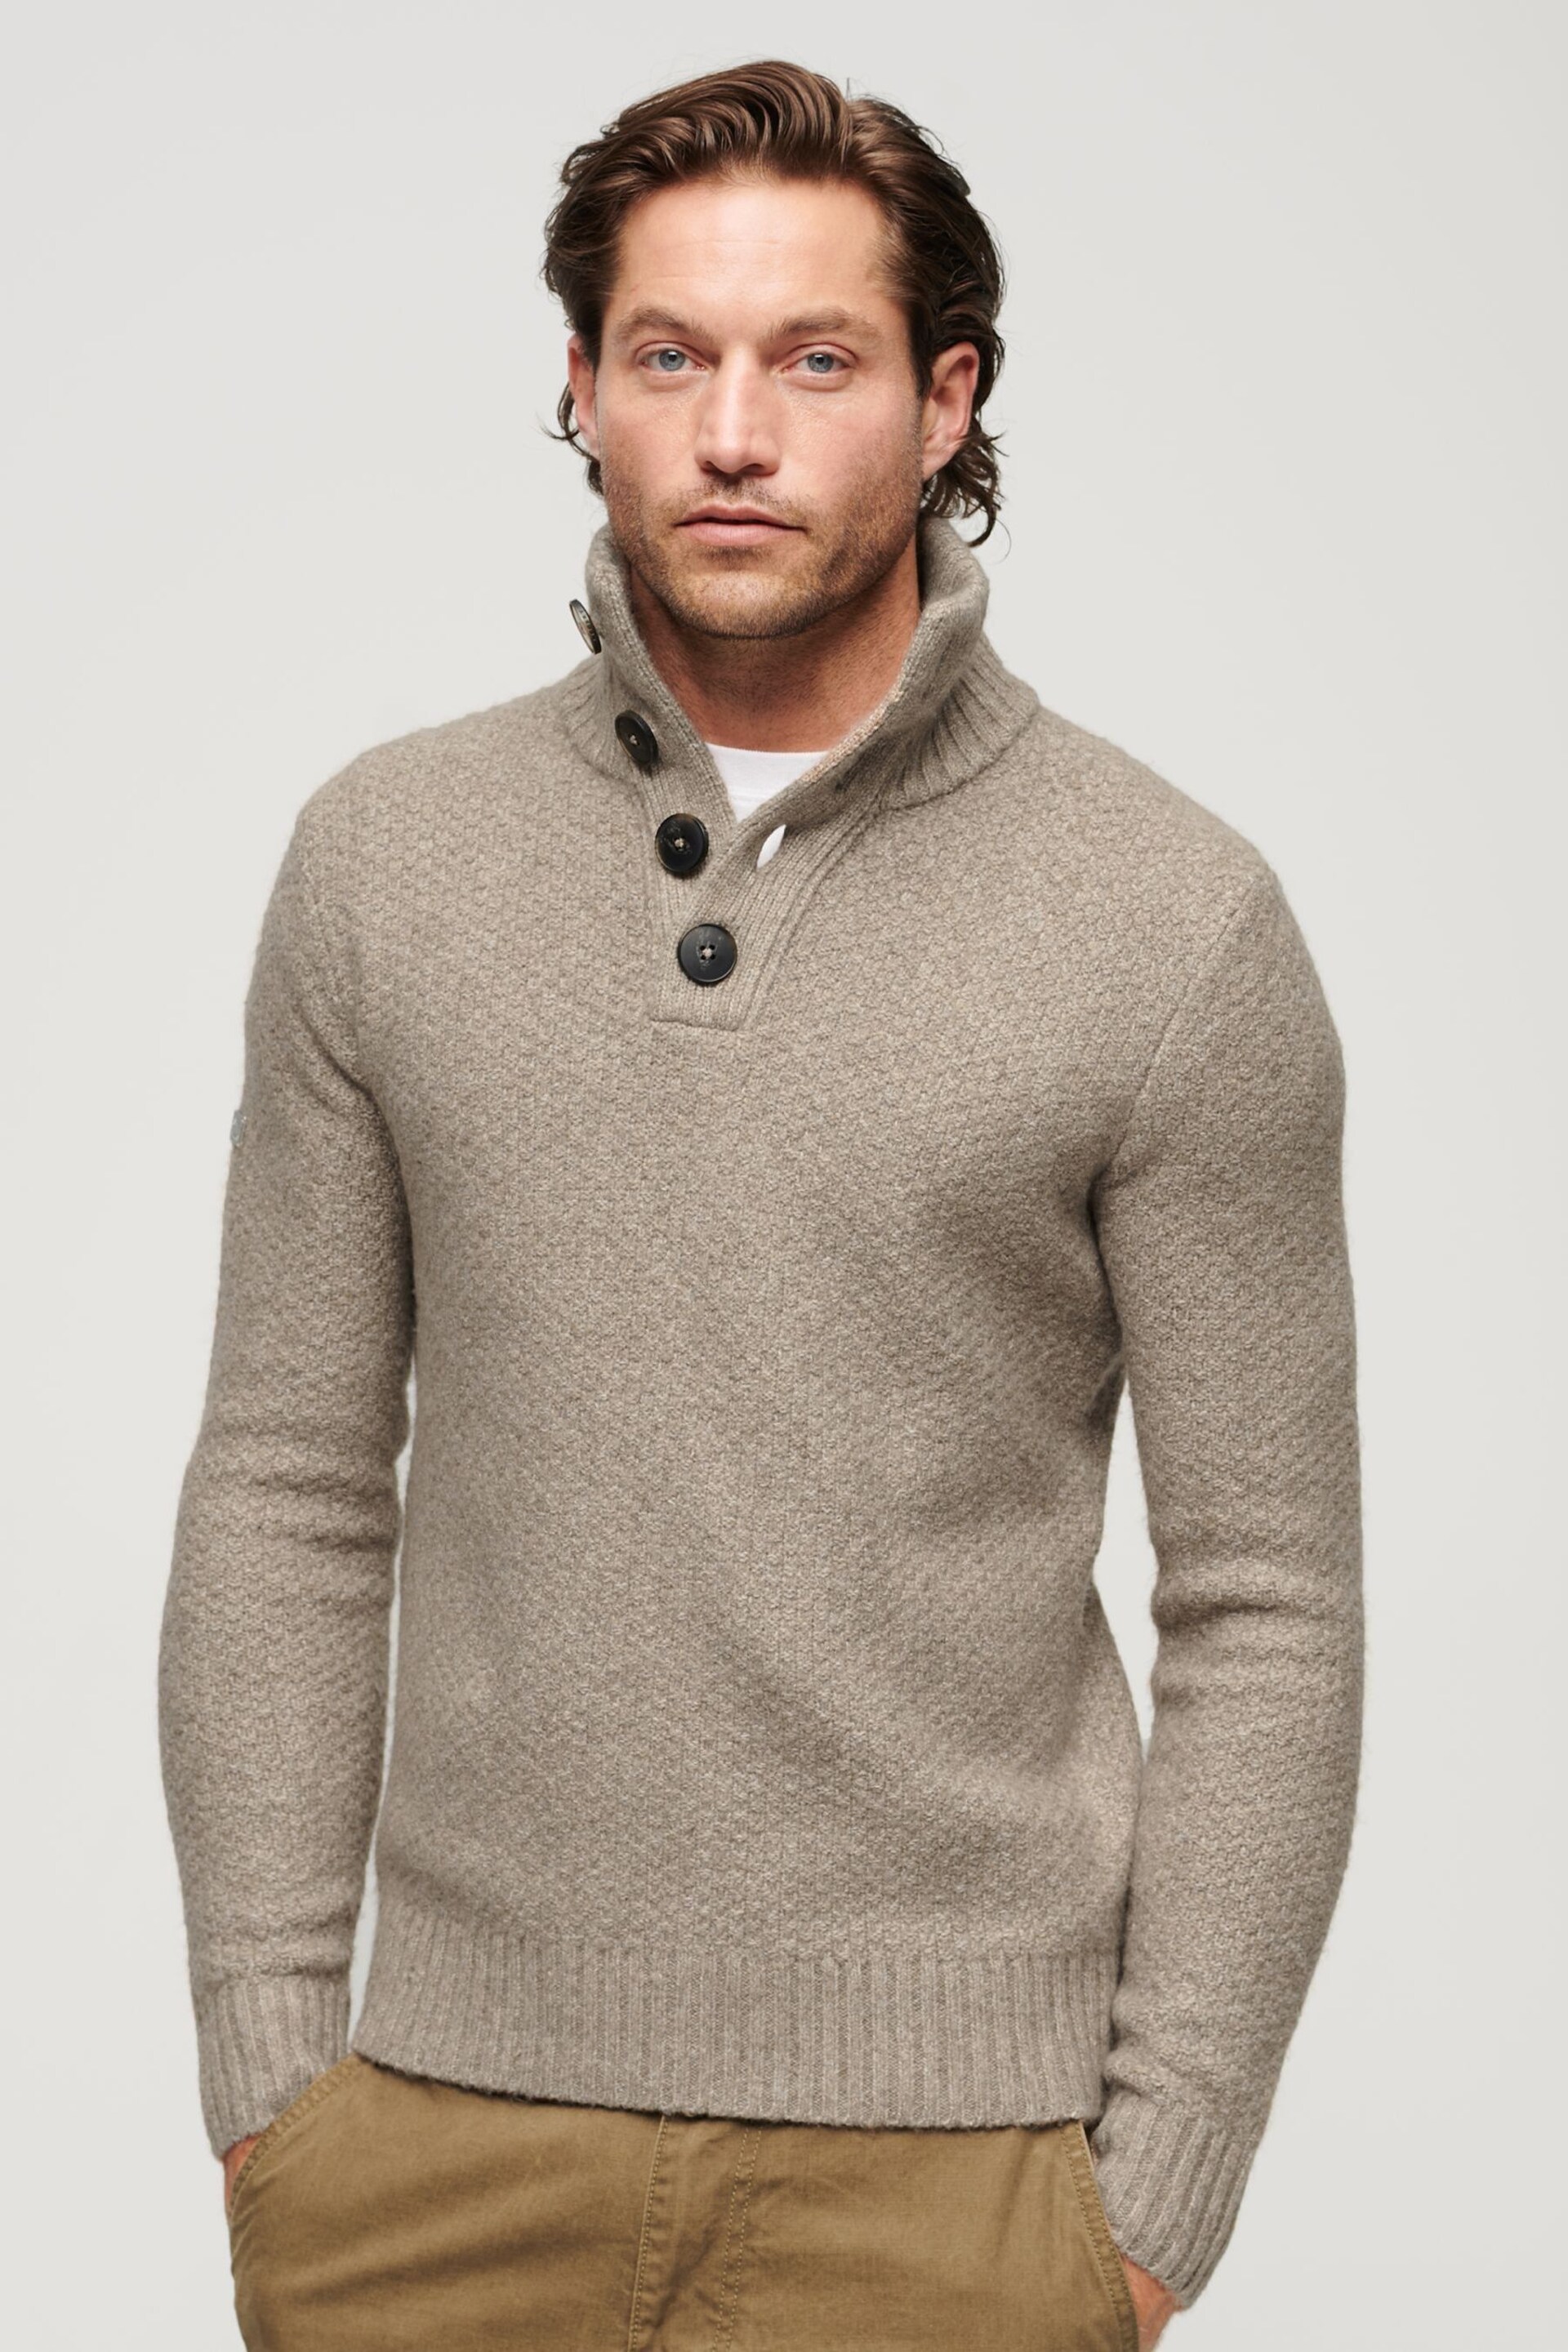 Superdry Beige Chunky Button High Neck Jumper - Image 1 of 6